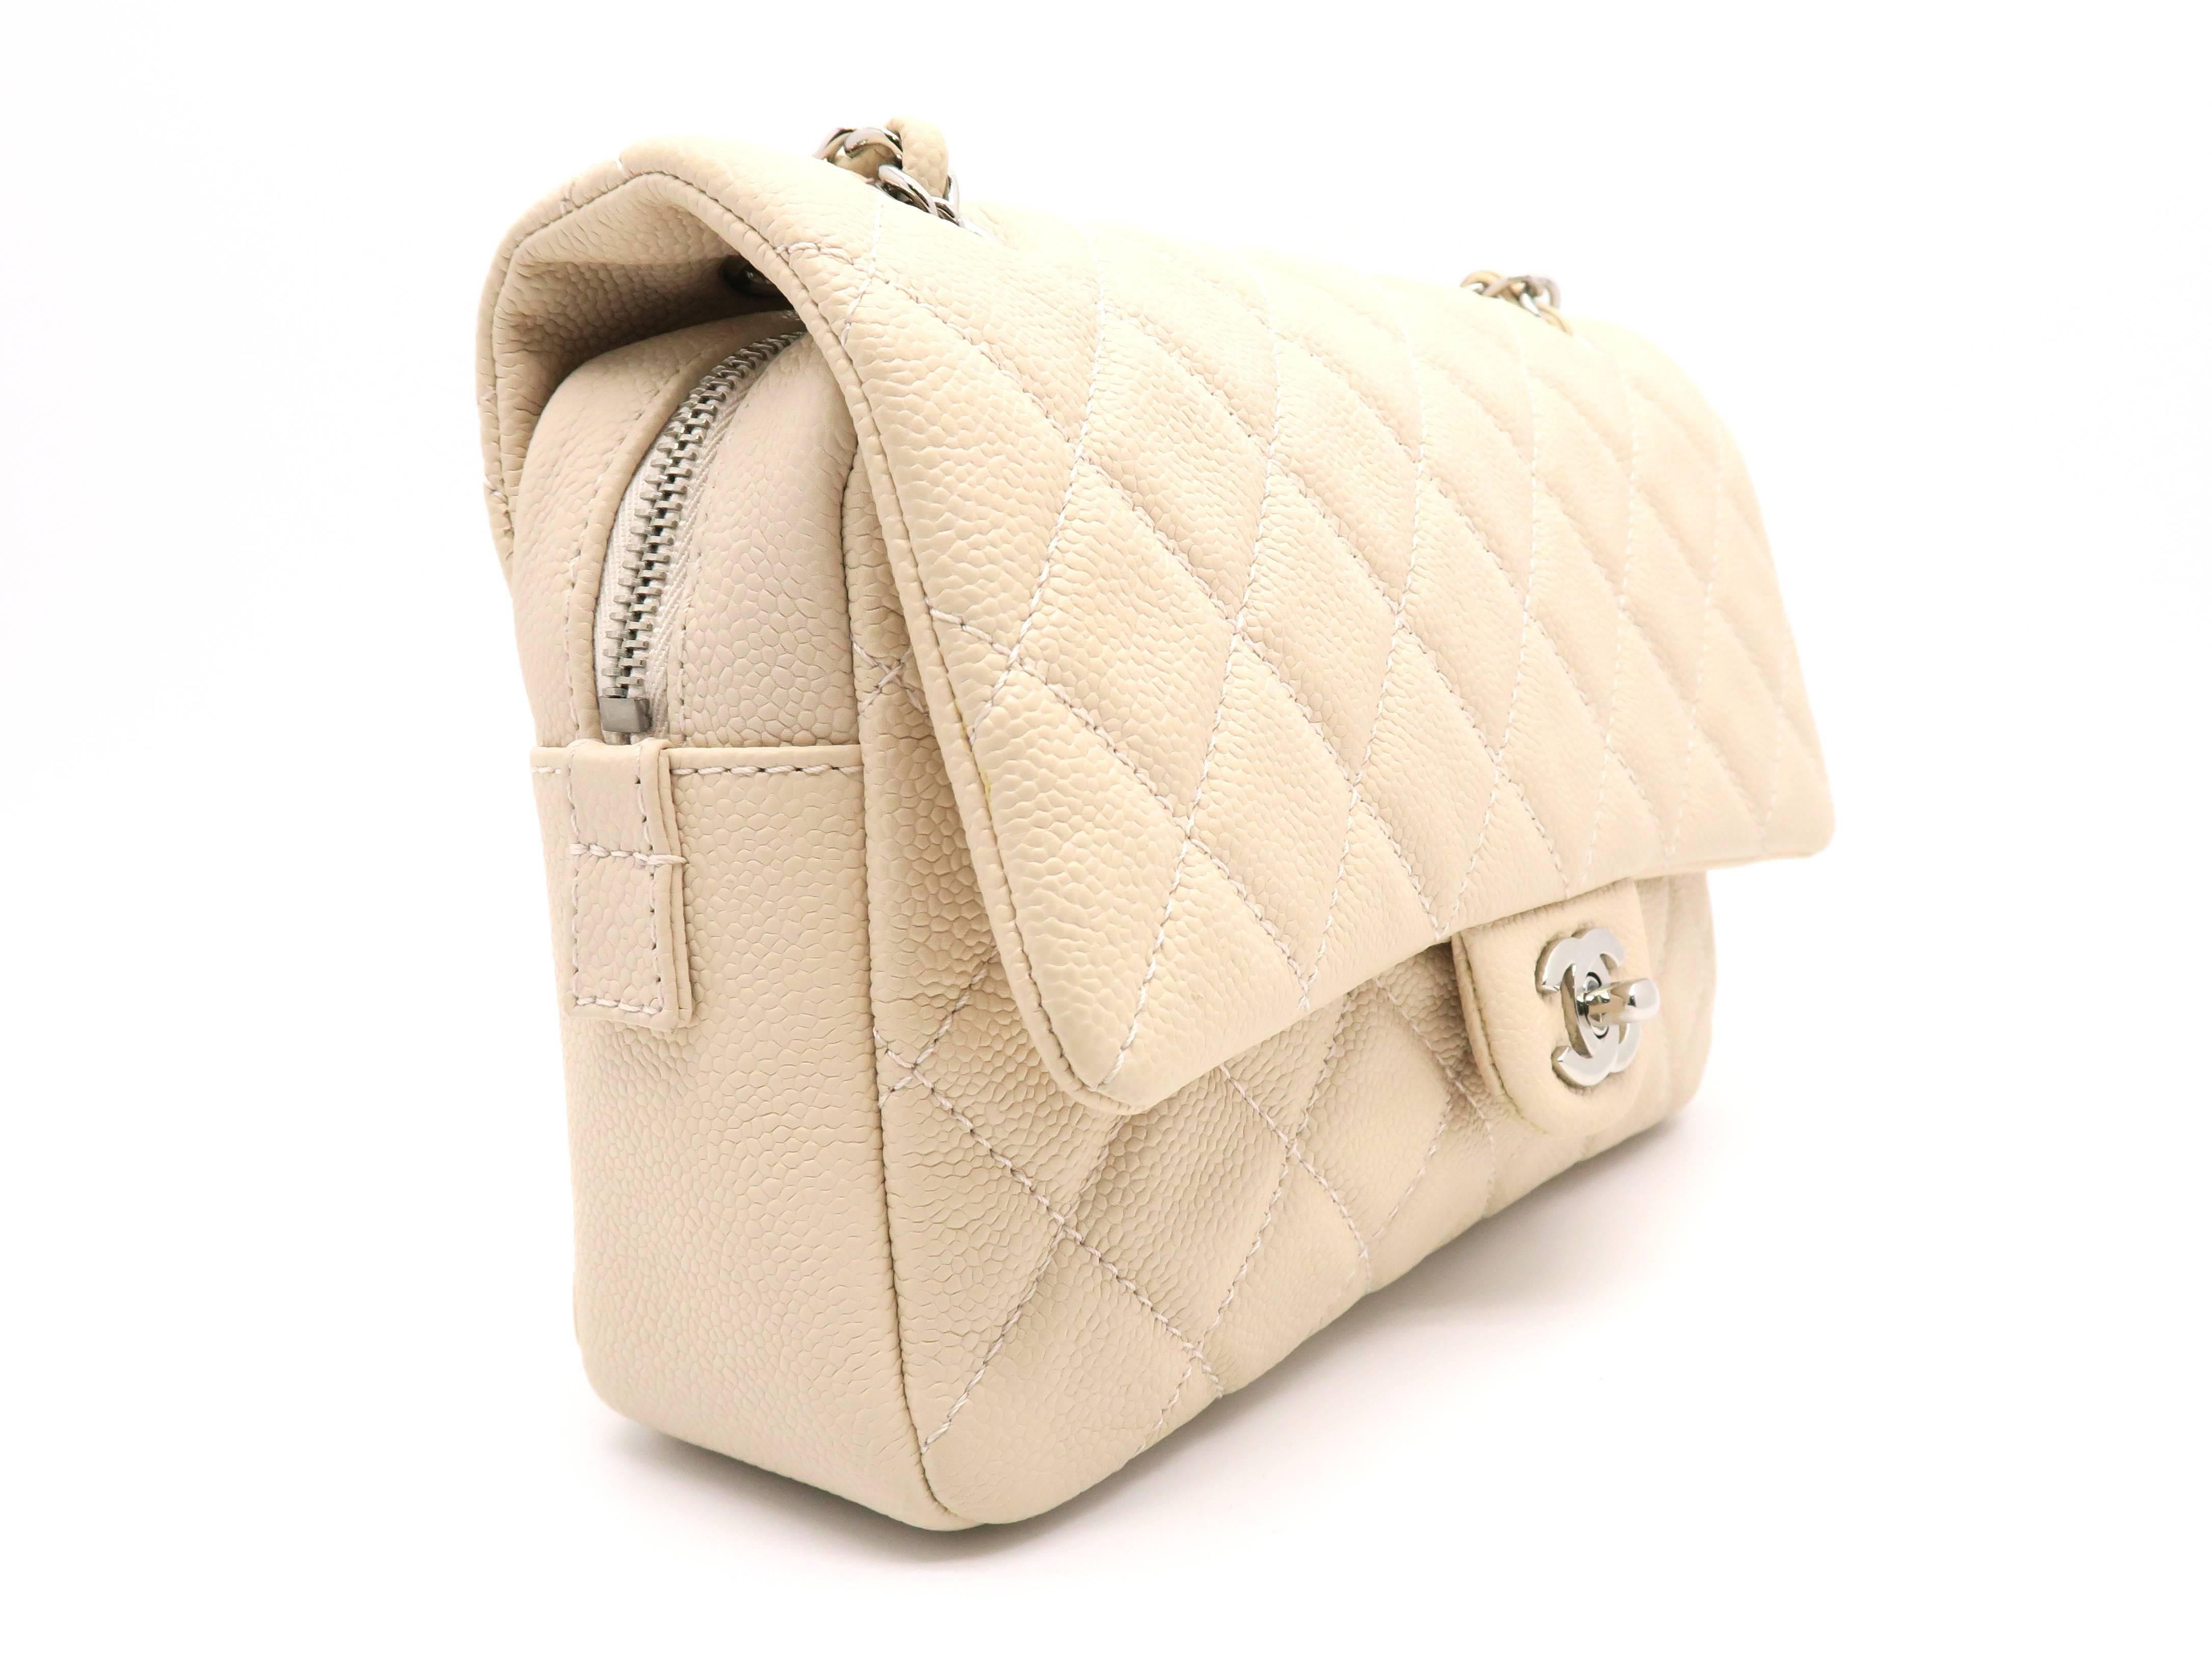 Color: Light Pink

Material: Quilted Caviar Leather

Condition: Rank S 
Overall: Almost New
Surface: Good
Corners: Good
Edges: Good
Handles/Straps: Good
Hardware: Good

Dimension: W24.5 × H16 × D6cm（W9.6" × H6.2" × D2.3"）
Shoulder